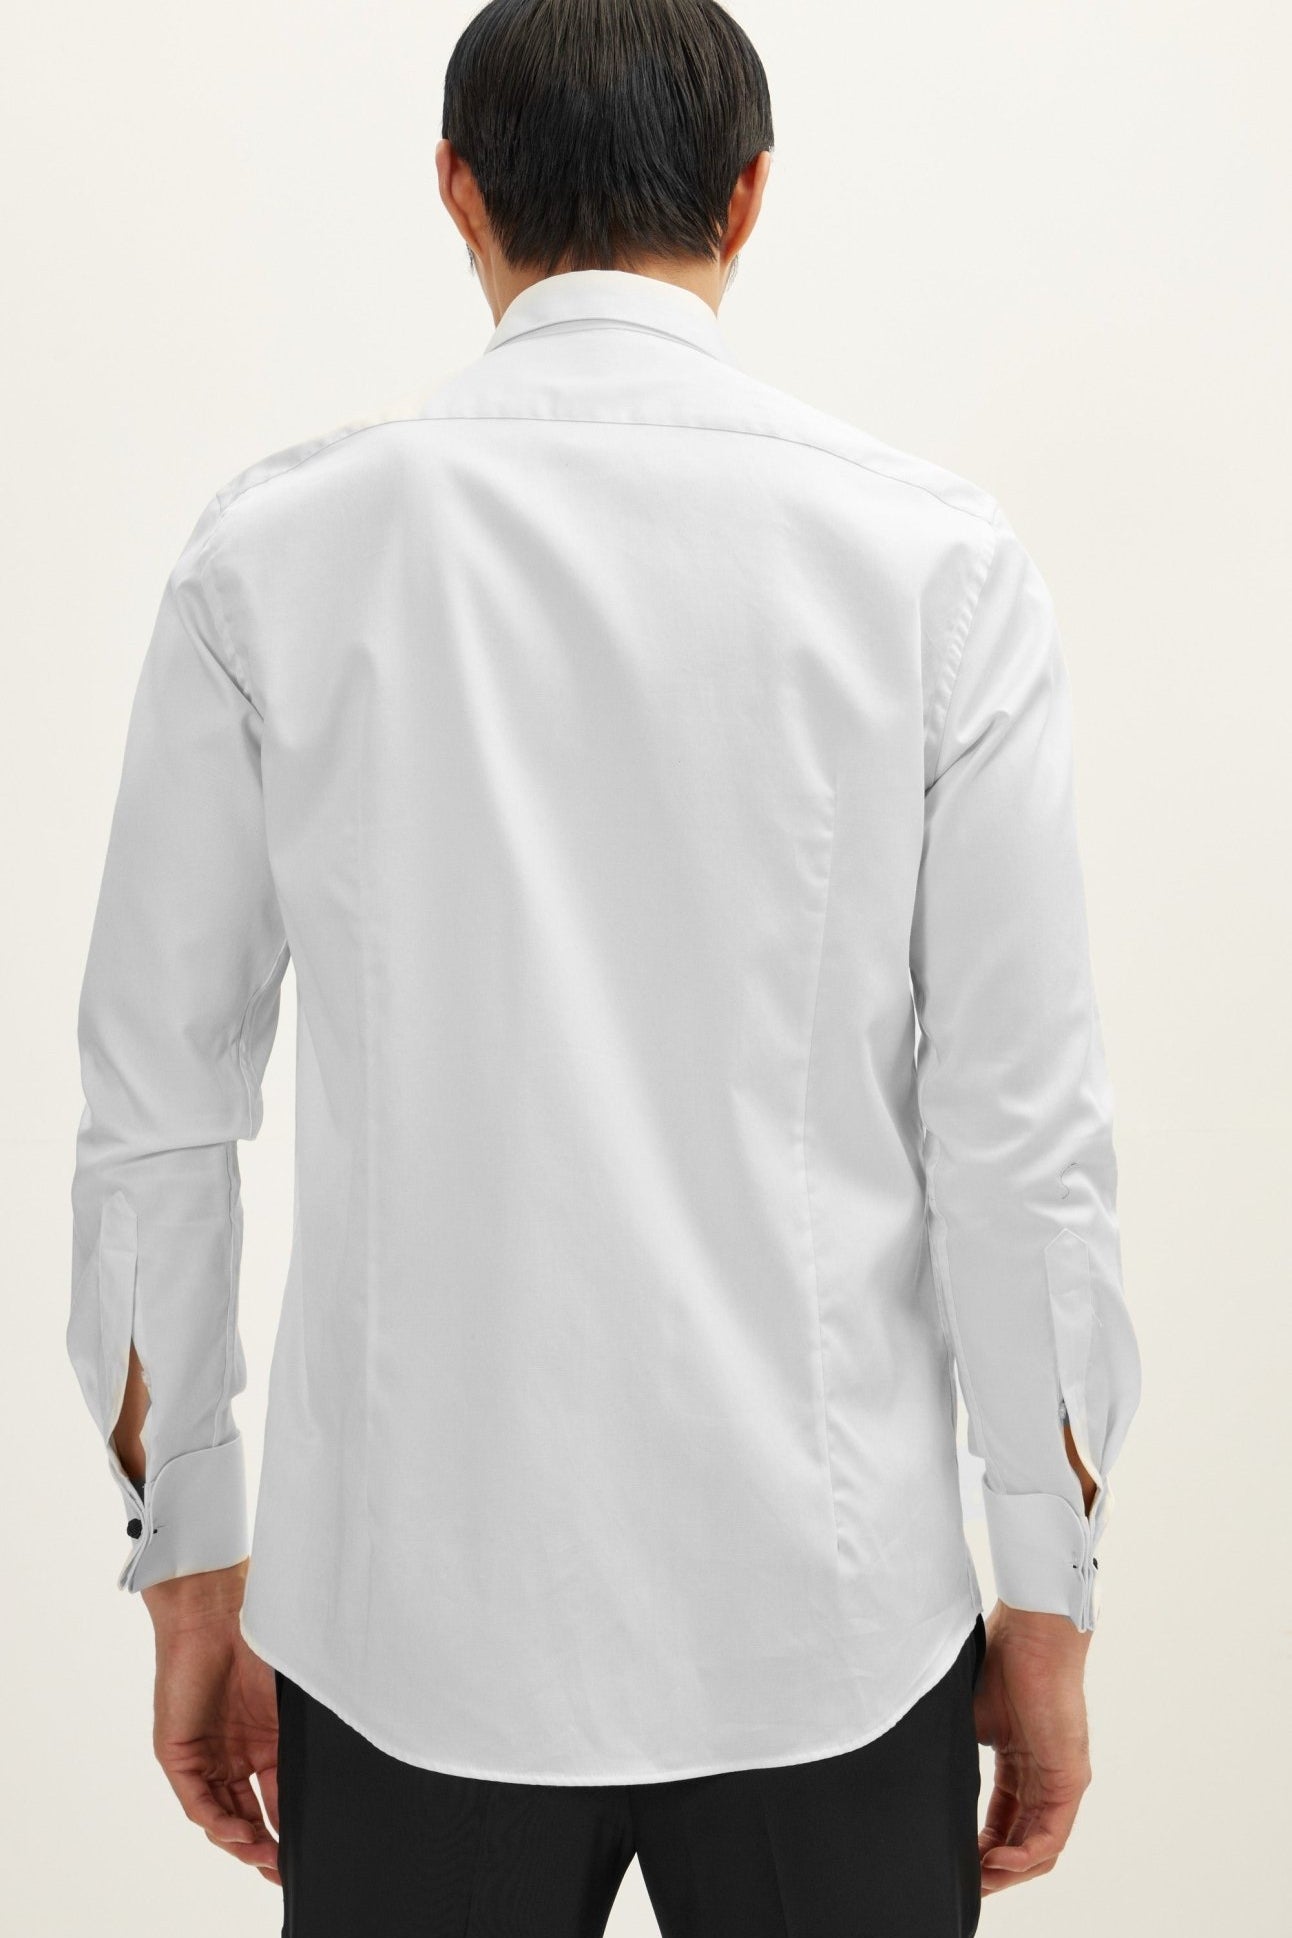 Wing Classical Top Front Stud Tuxedo Shirt - White - Ron Tomson